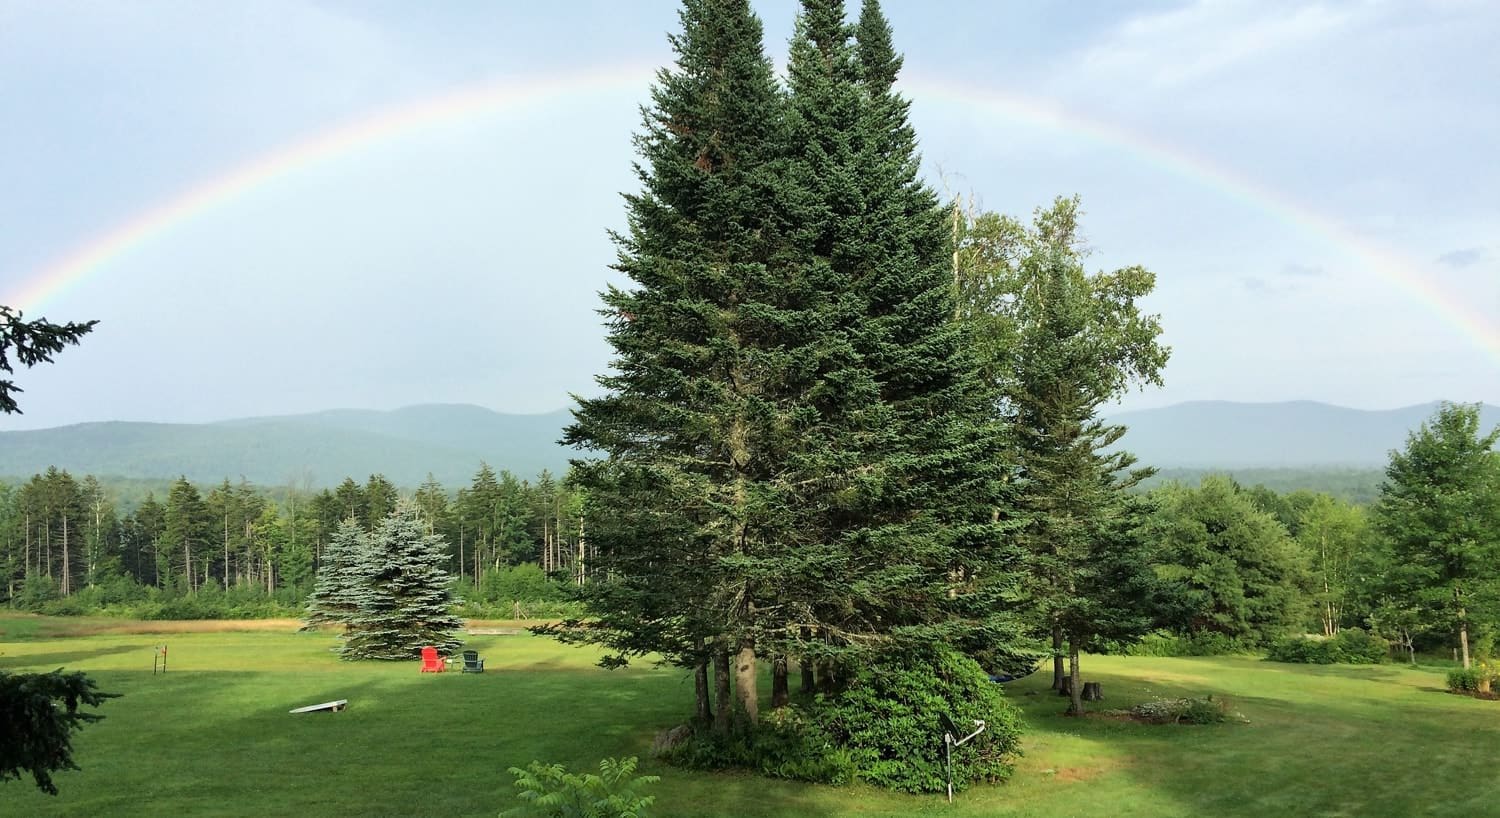 Gorgeous rainbow arced over the properties green grass, trees and distant hills